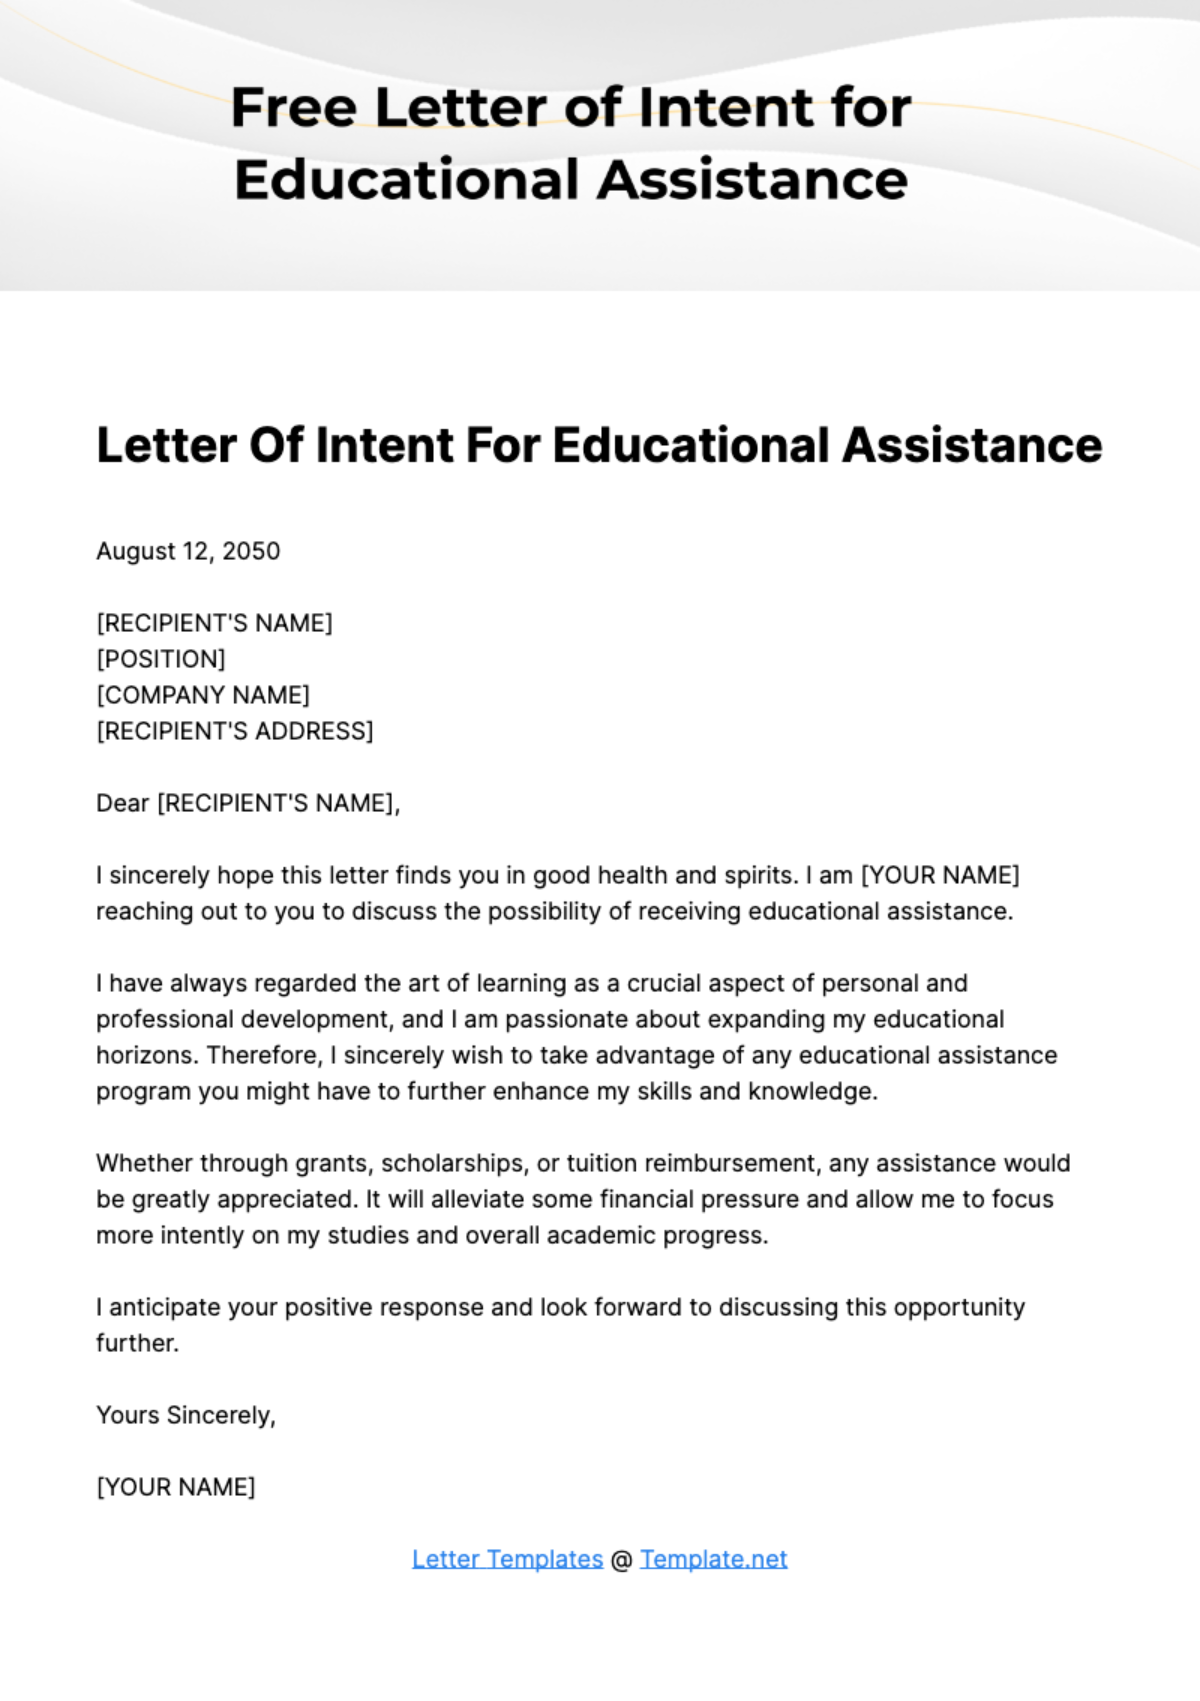 Free Letter of Intent for Educational Assistance Template